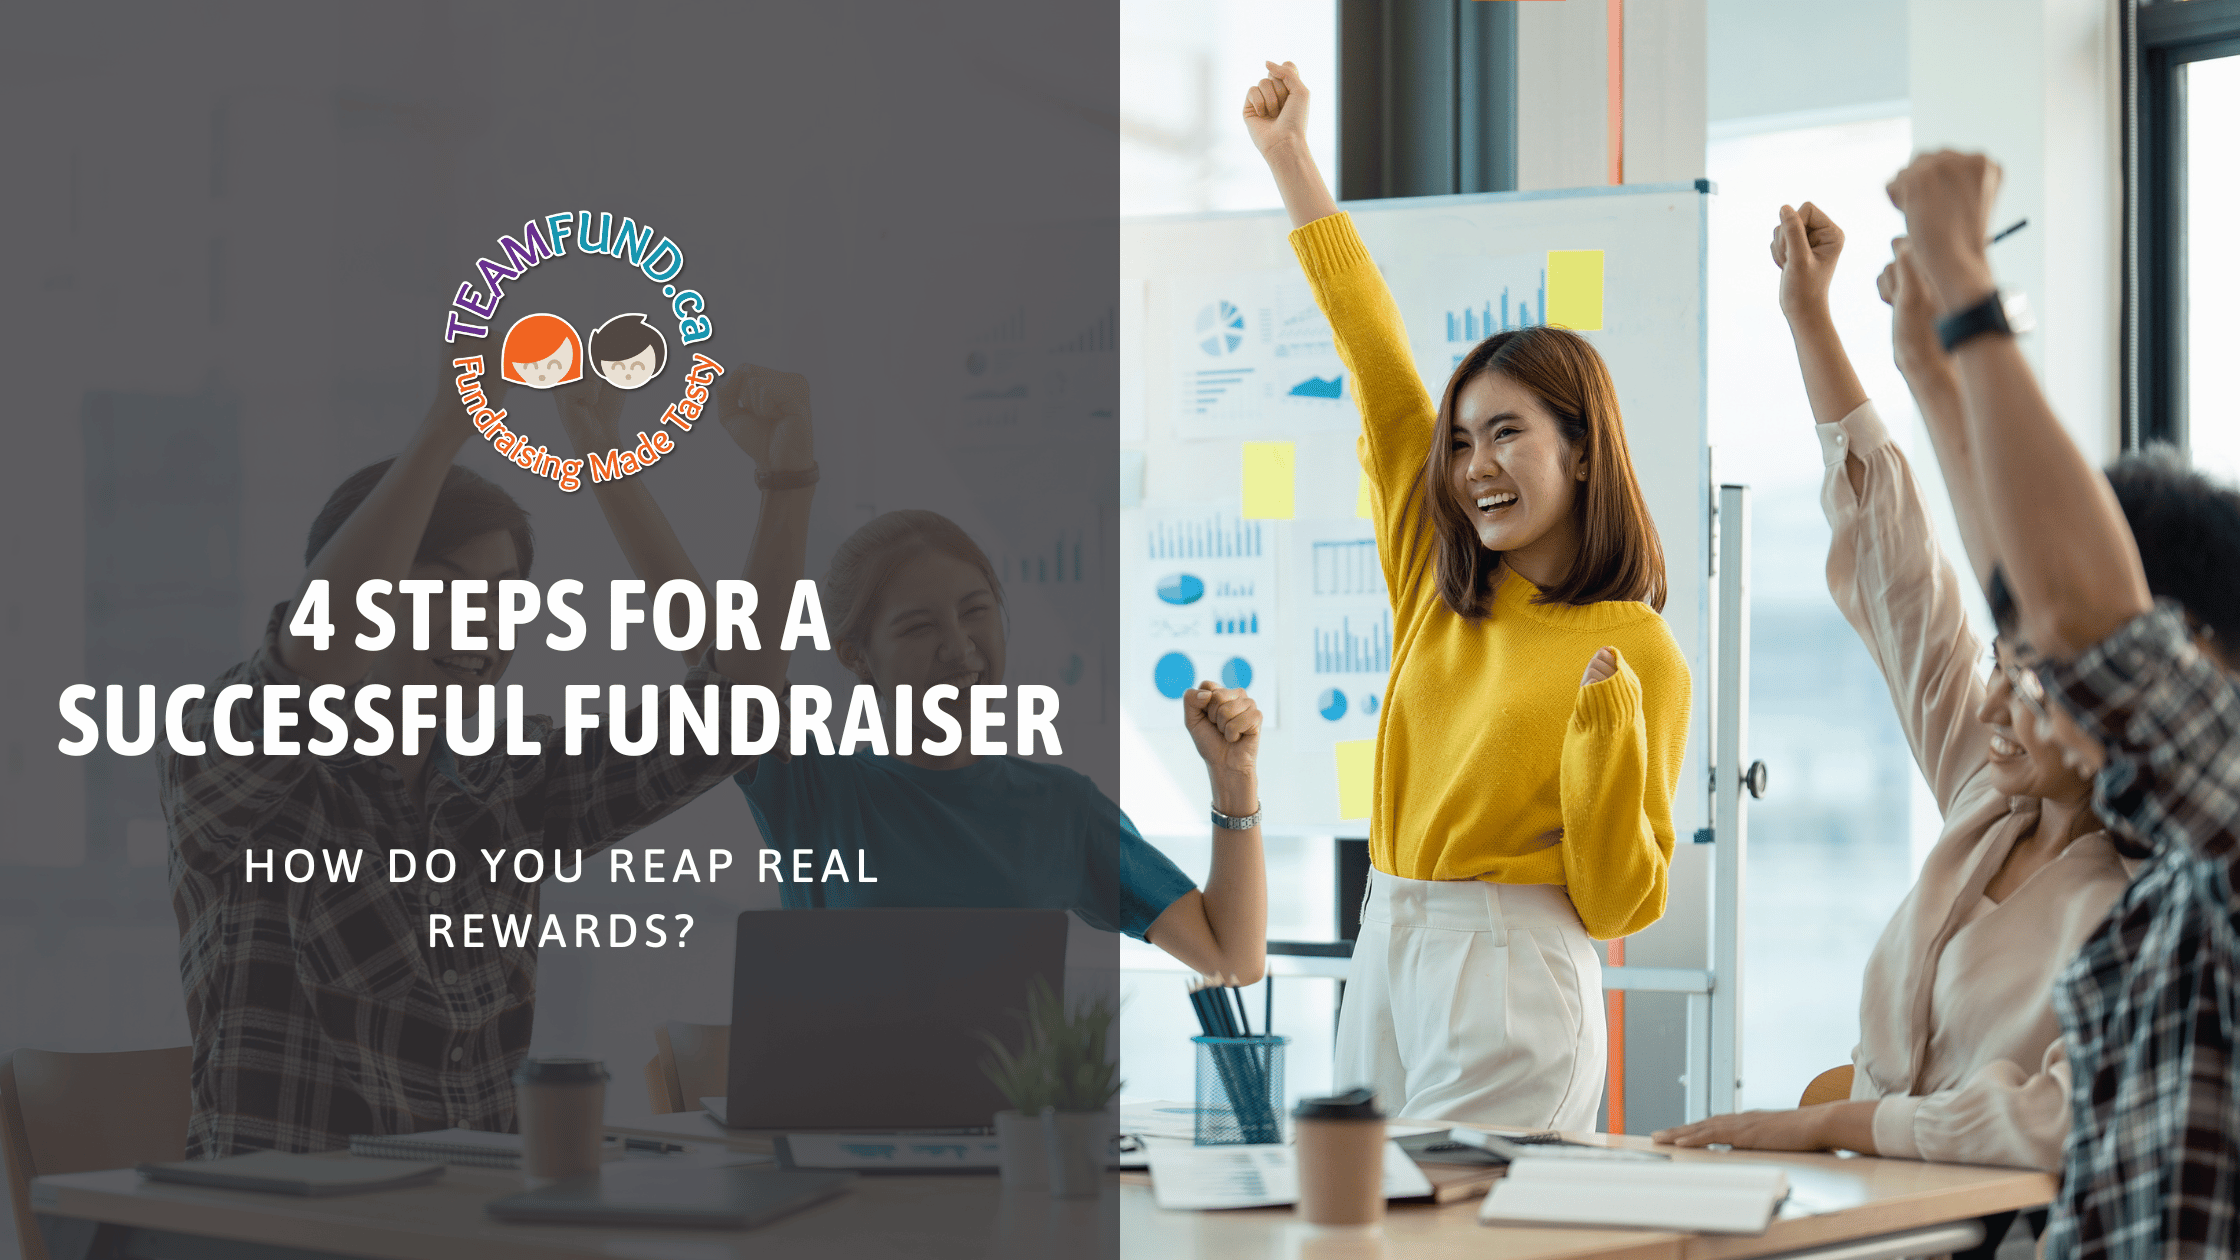 4 Steps to Make Your Next Fundraiser a Huge Success